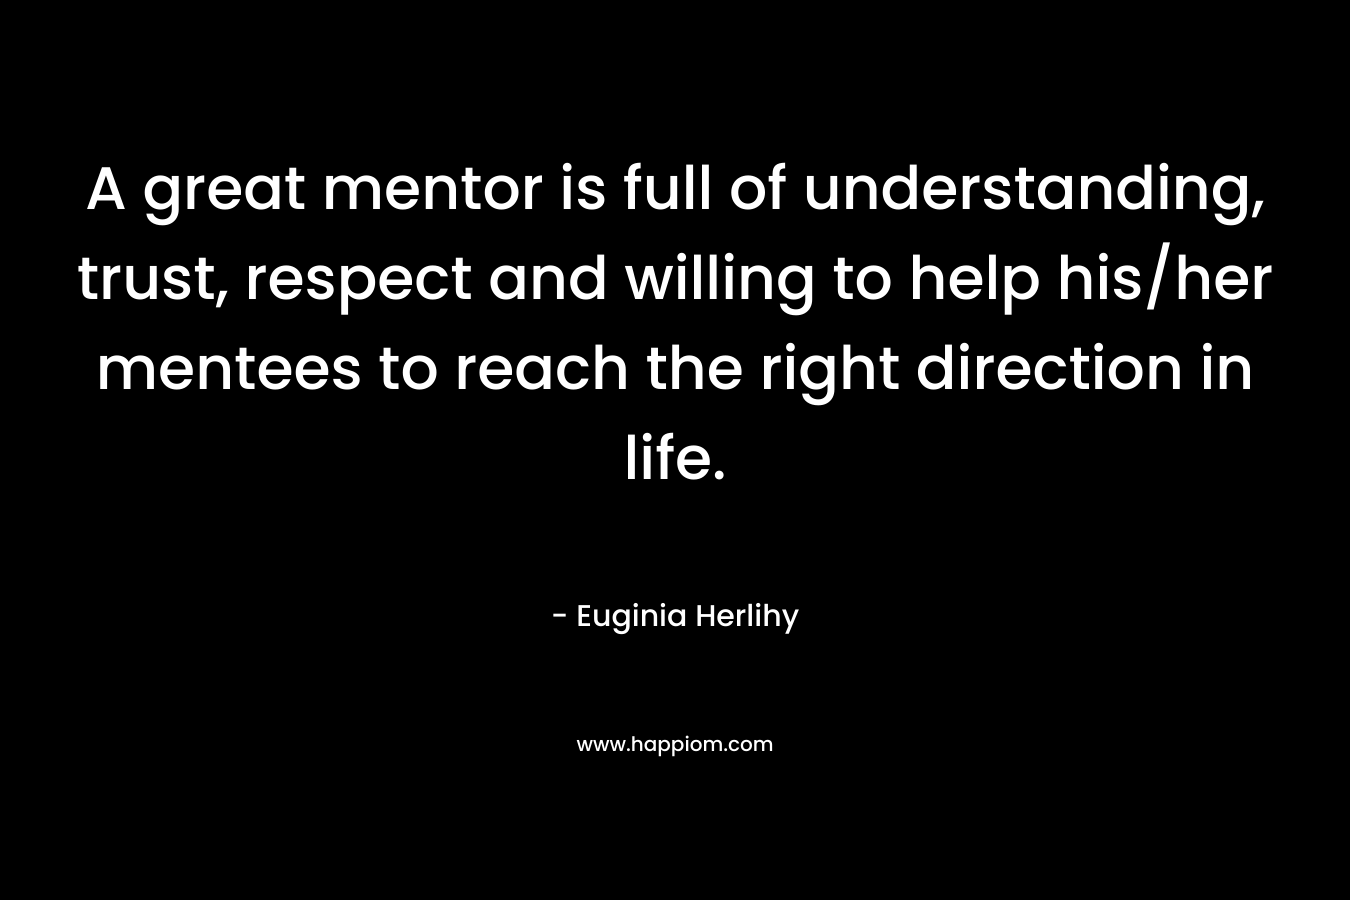 A great mentor is full of understanding, trust, respect and willing to help his/her mentees to reach the right direction in life.